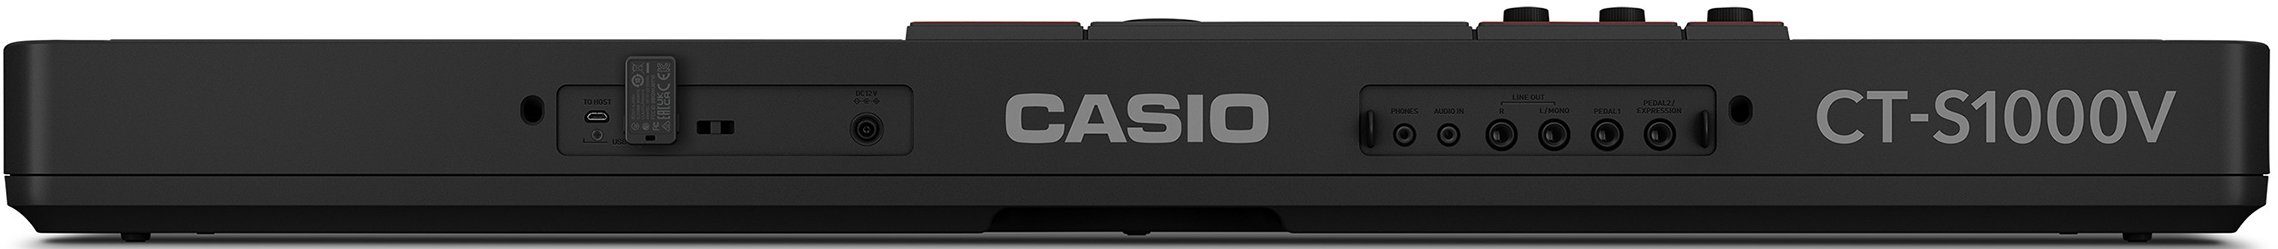 Home-Keyboard Bluetooth-Adapter CT-S1000V, mit CASIO